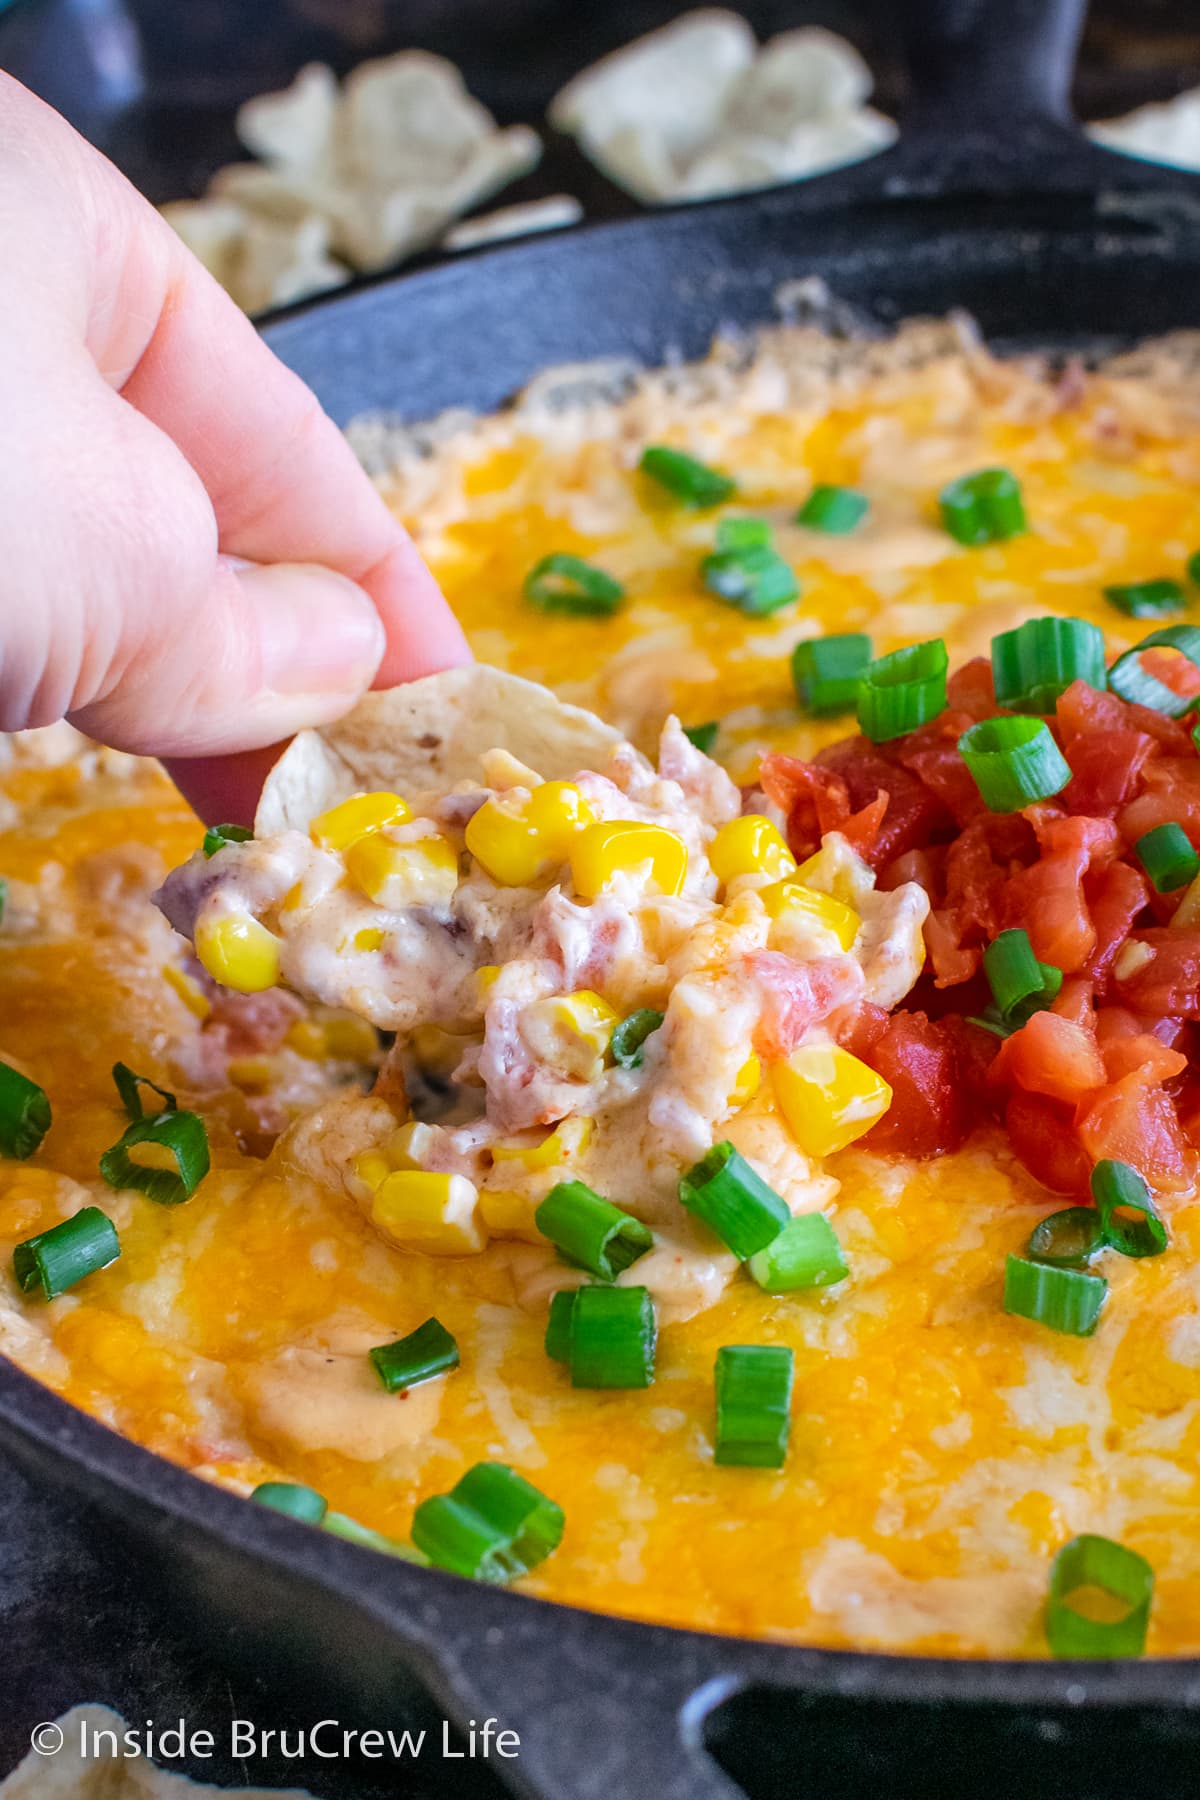 A chip digging into a cheesy corn dip.